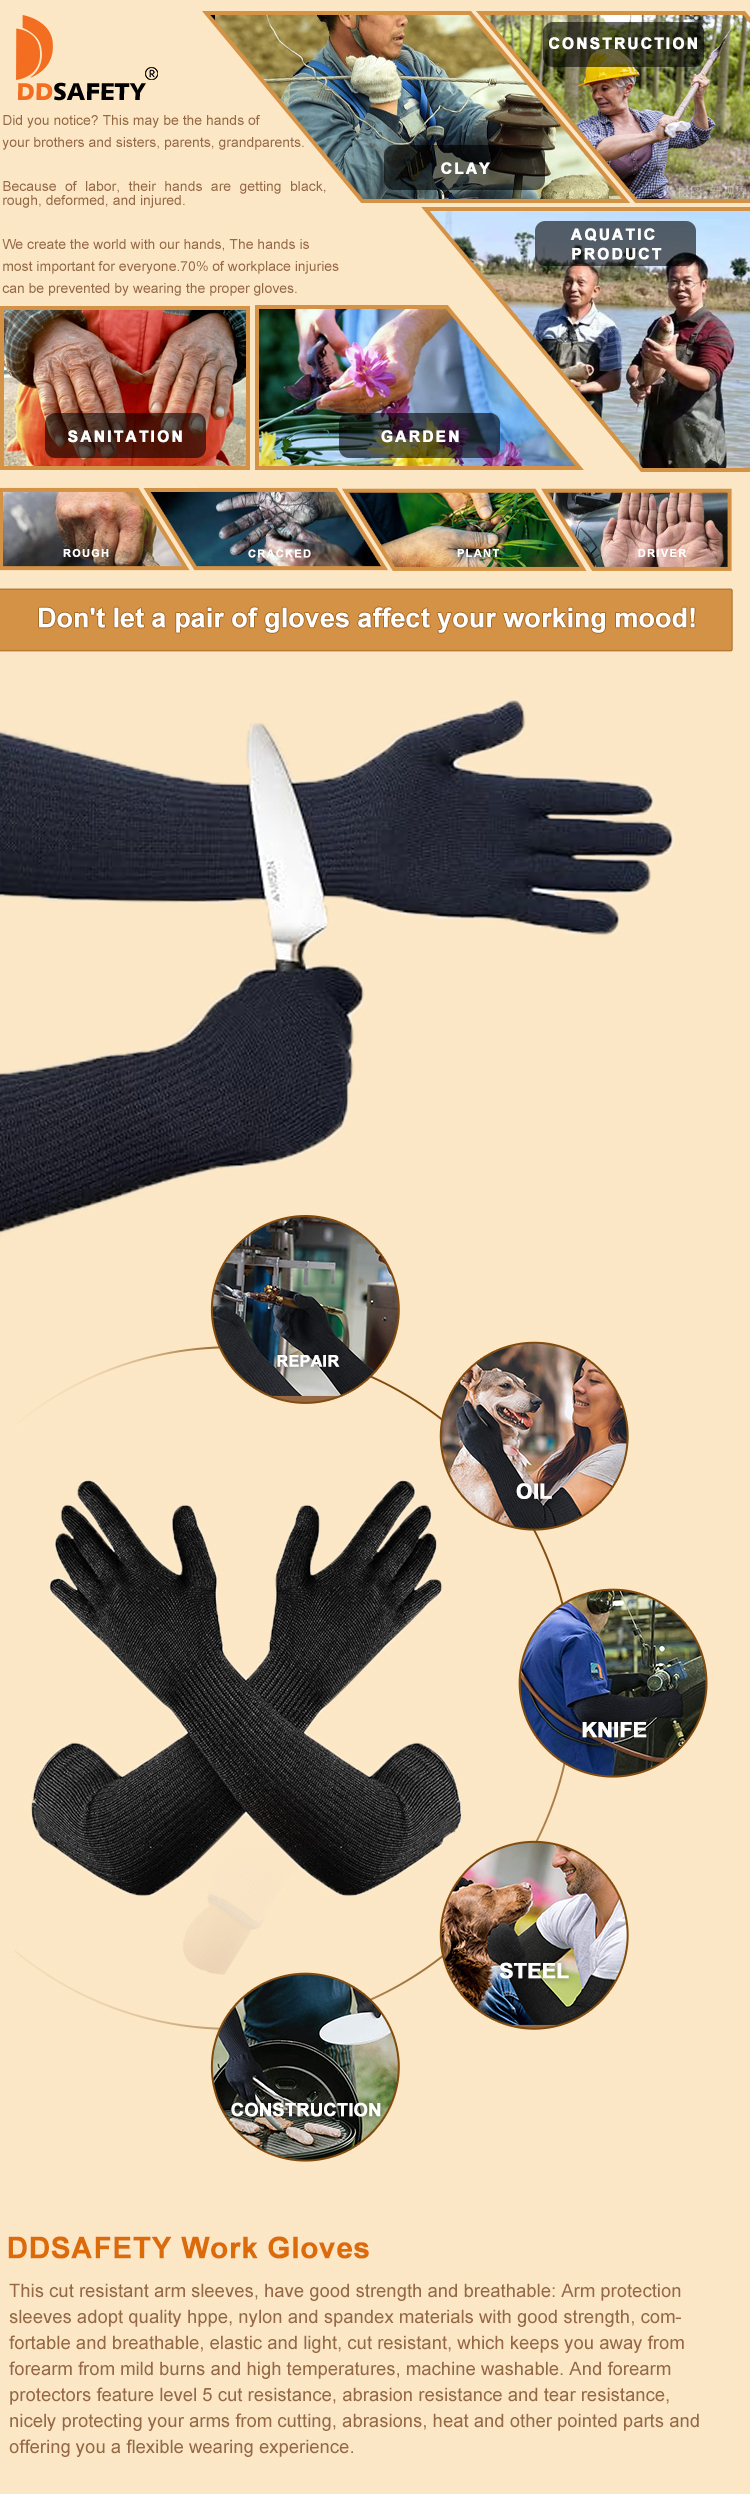 HPPE Gloves with Sleeves - Anti Scratch, Heat & Cut Resistant Sleeves Gloves - DCR845 HPPE Gloves with Sleeves - Anti Scratch, Heat & Cut Resistant Sleeves Gloves - DCR845 Level 3 Protection gloves sleeve,Cut Resistant Safety Sleeves,100% Kevlar Gloves with Sleeves,Anti Scratch gloves sleeve